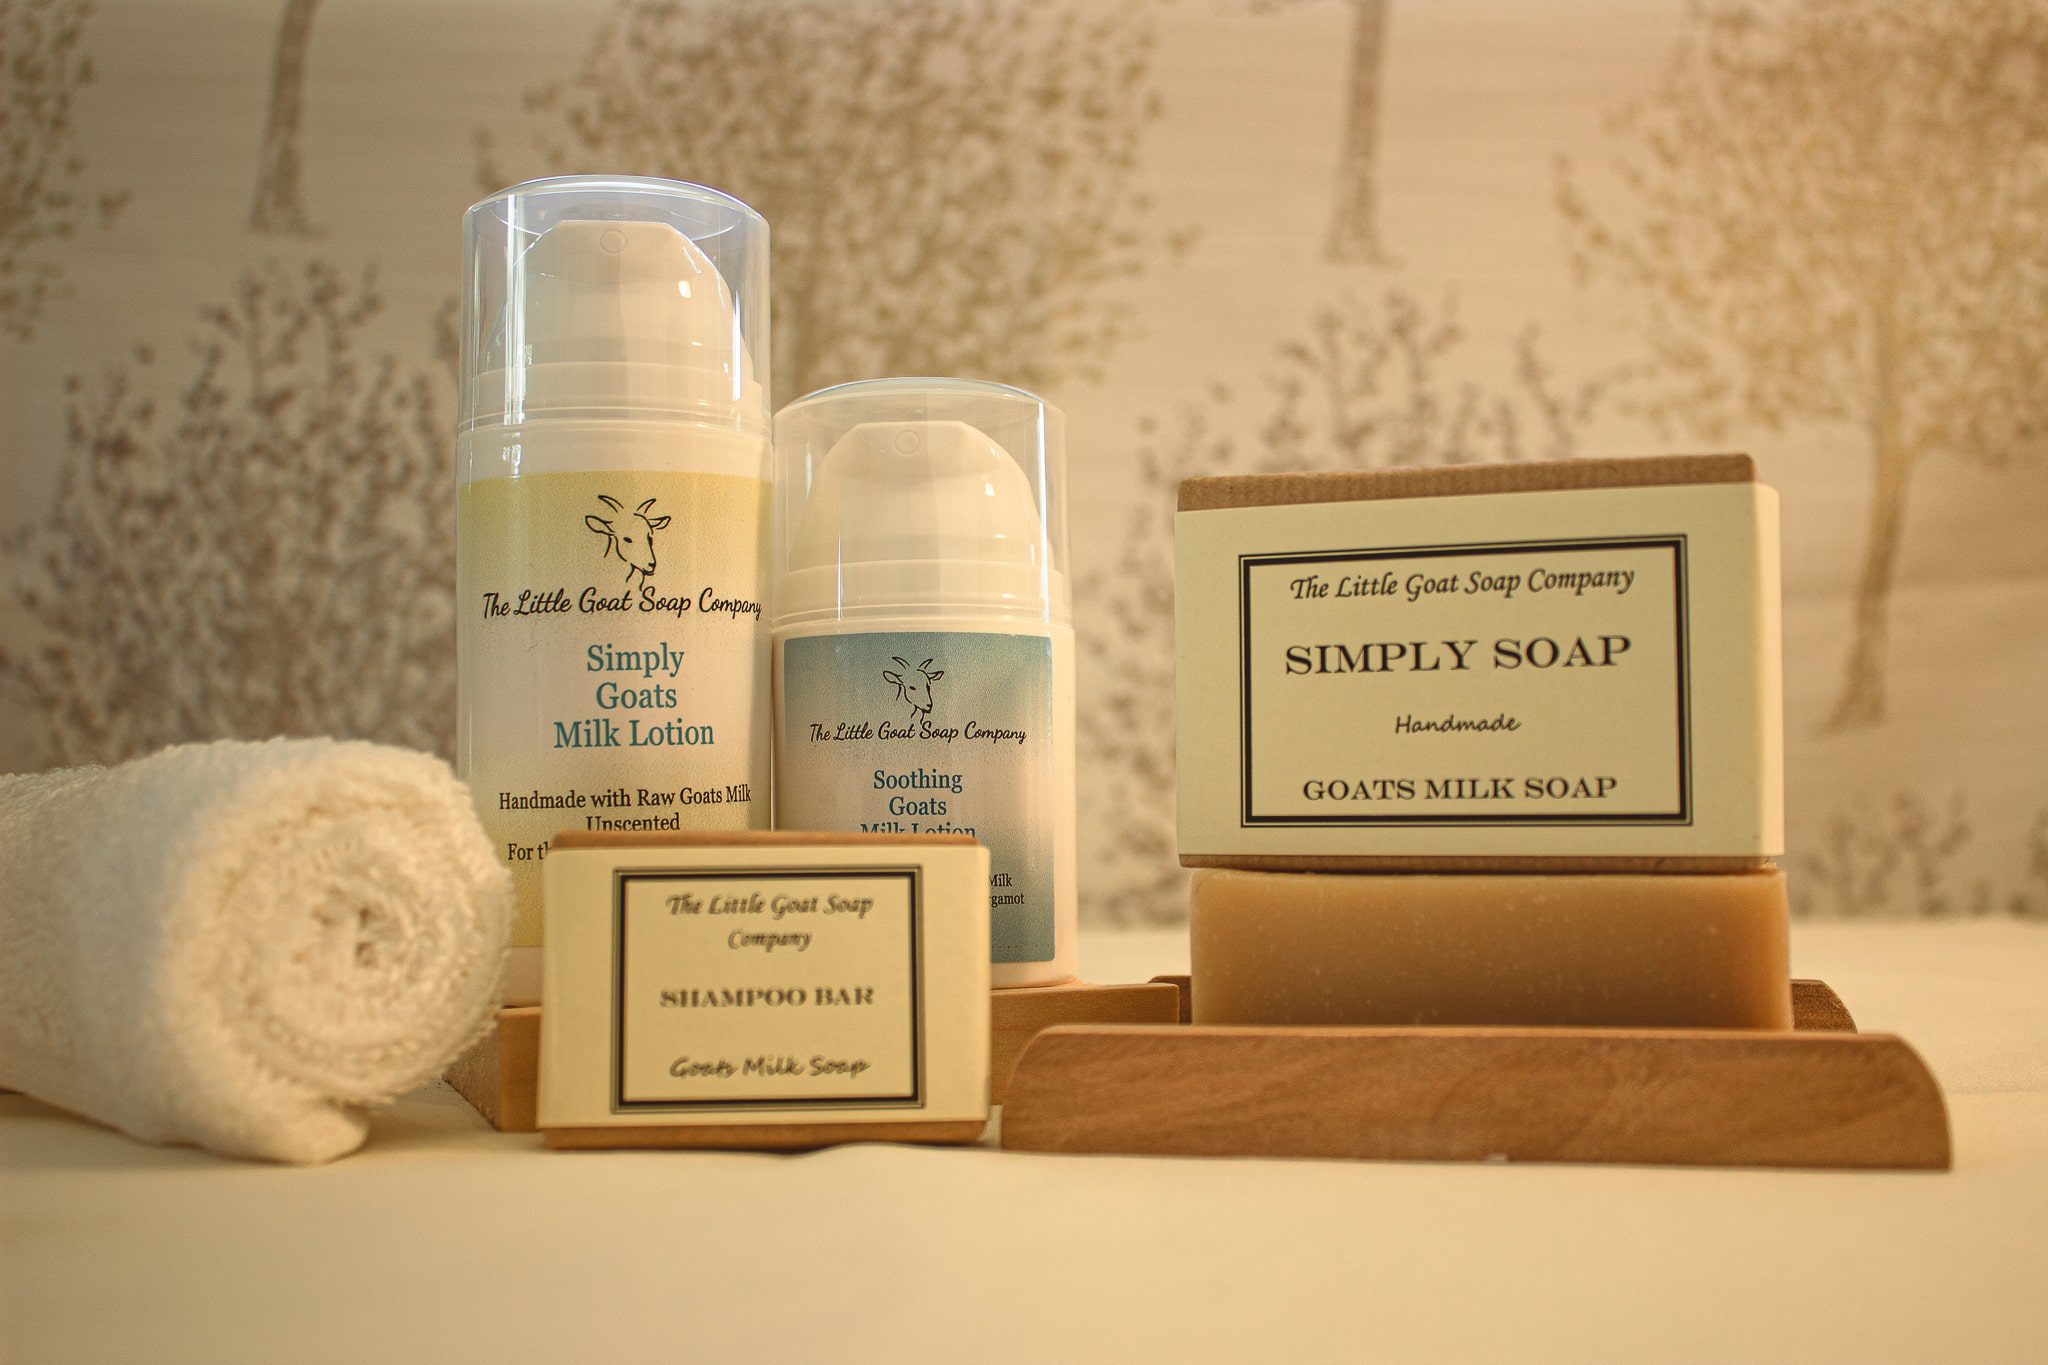 Image of both large and small Simply Soap Goats Milk Soap, in the background there is also 2 cans of goat milk lotion.